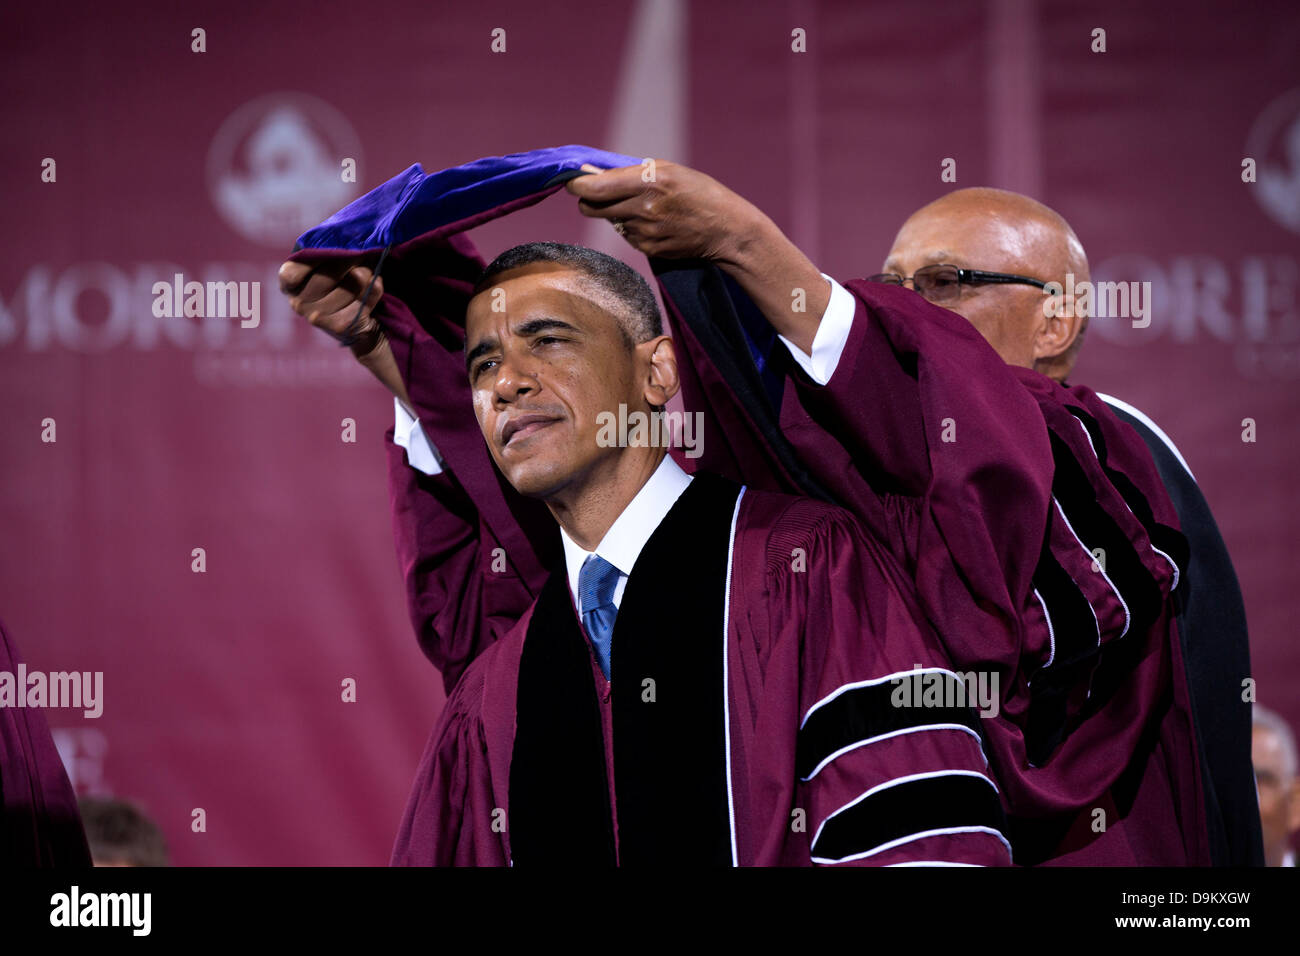 Dr. John Wilson Jr., President of Morehouse College, presents US President Barack Obama with an honorary Doctor of Laws degree during the commencement ceremony at Morehouse College May 19, 2013 in Atlanta, GA. Stock Photo